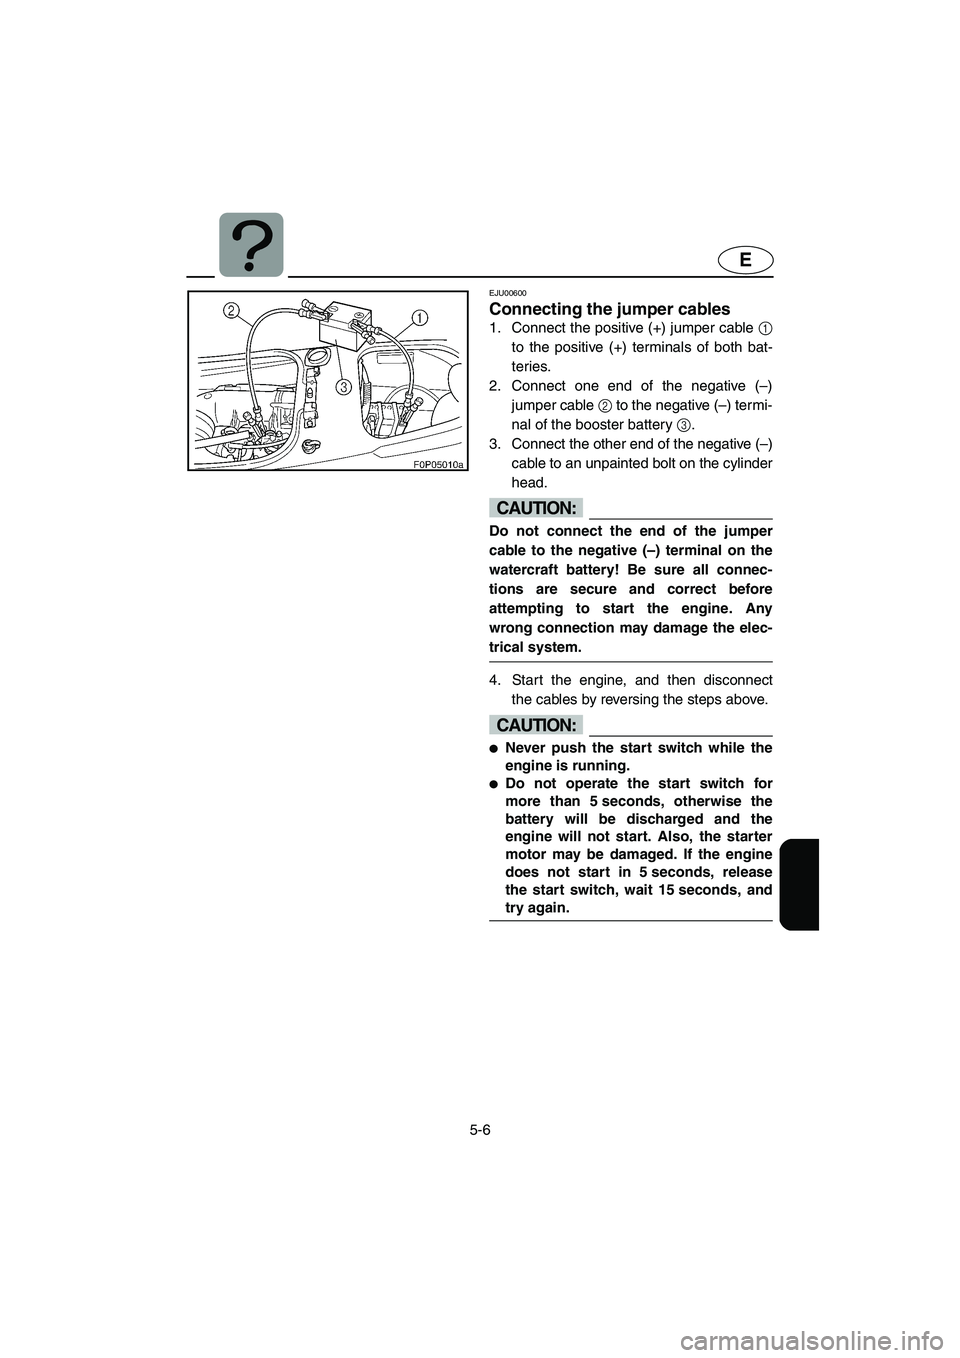 YAMAHA XL 800 2001  Owners Manual 5-6
E
EJU00600
Connecting the jumper cables
1. Connect the positive (+) jumper cable 1
to the positive (+) terminals of both bat-
teries.
2. Connect one end of the negative (–)
jumper cable 2 to the